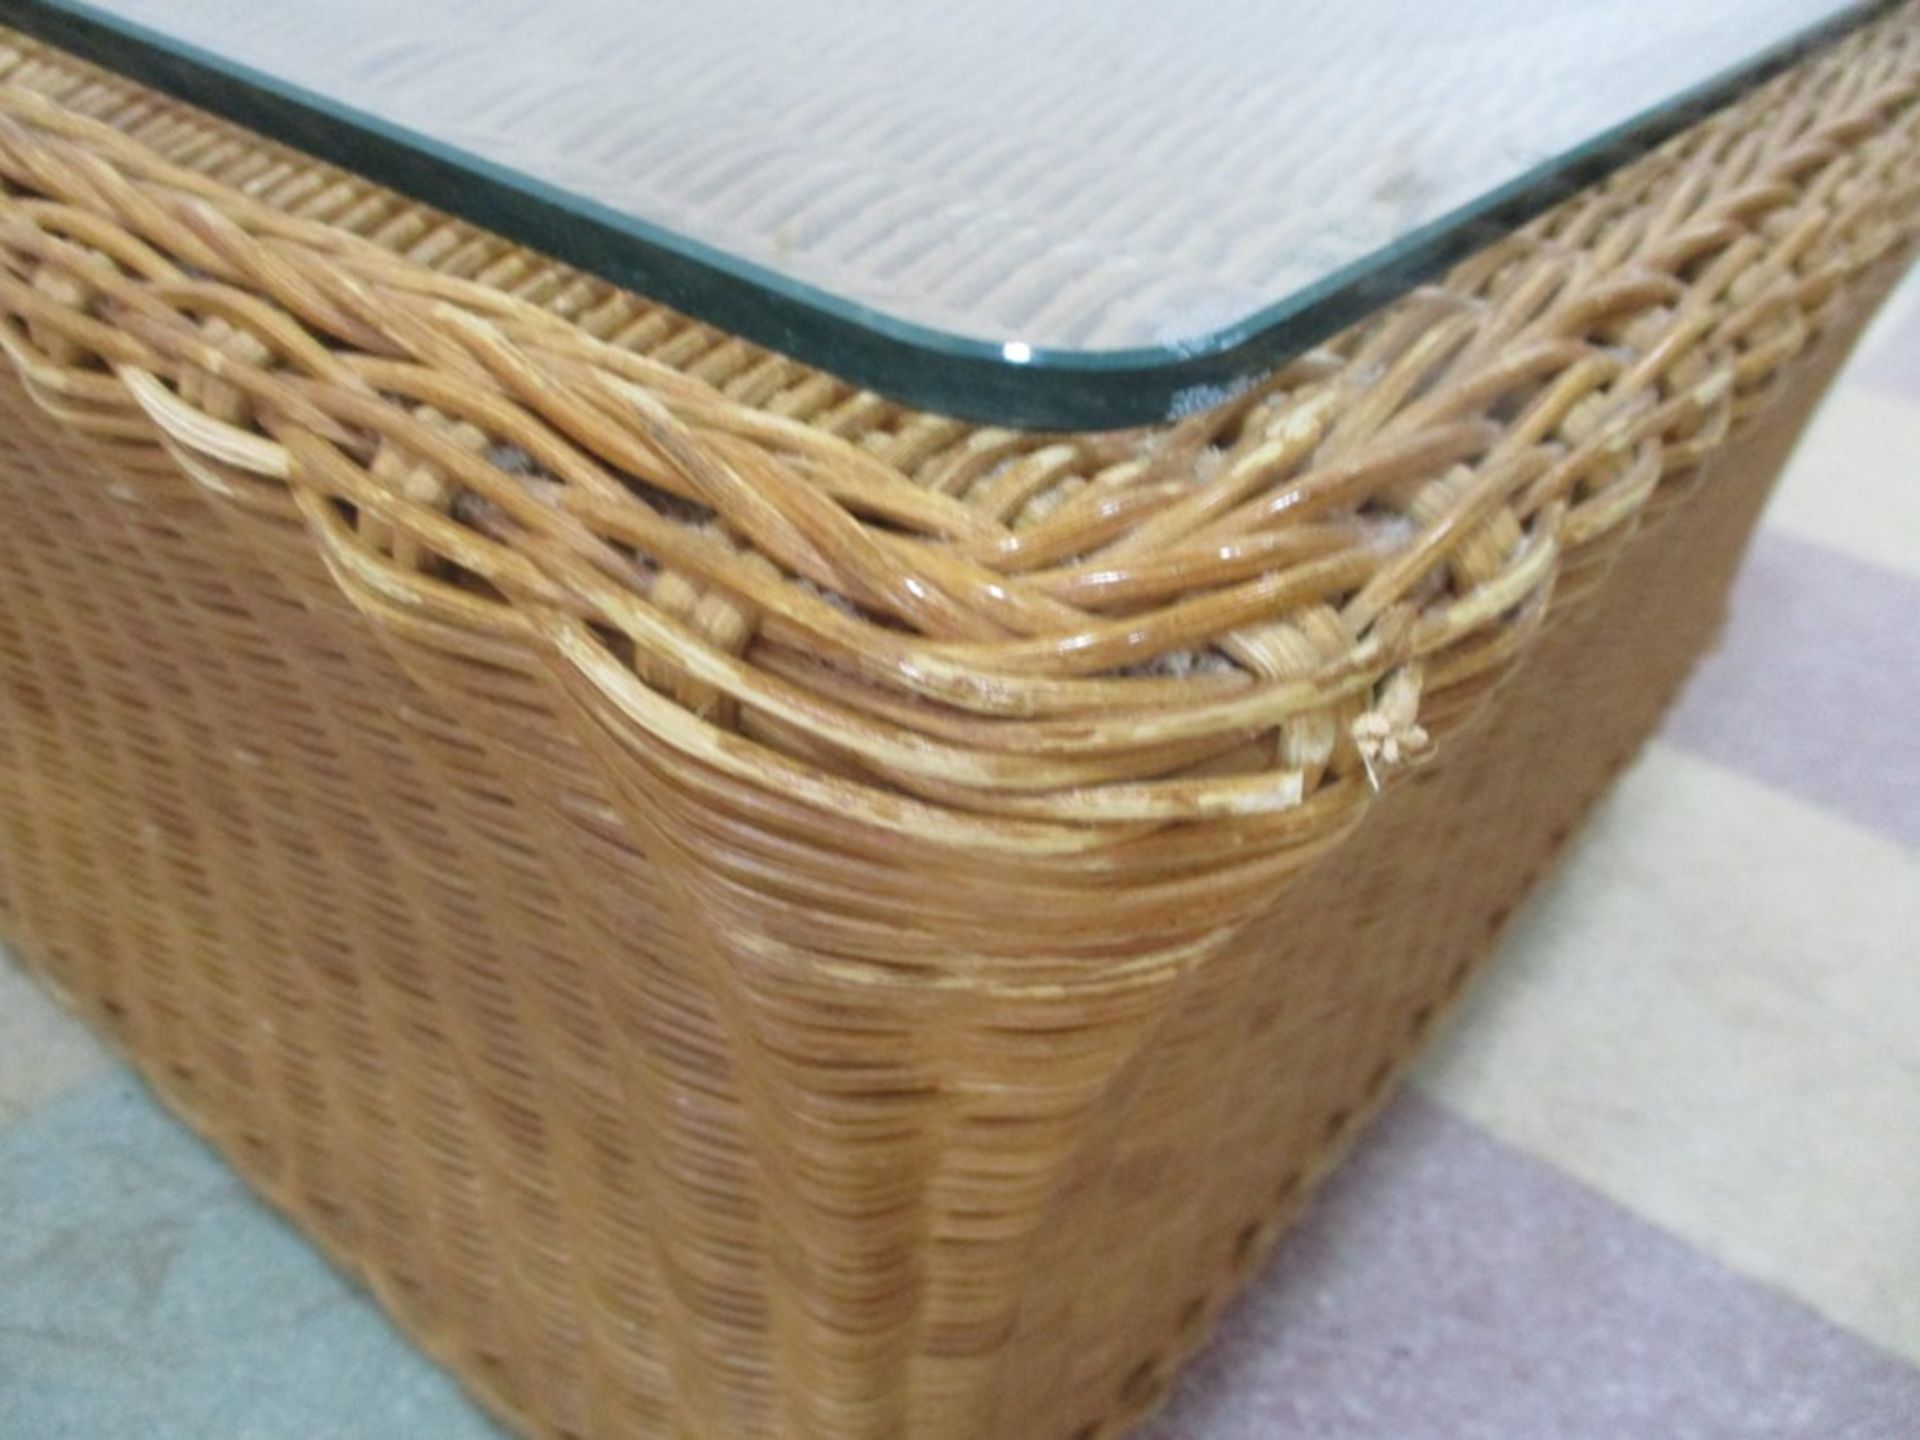 A wicker coffee table with glass top - Bild 5 aus 6